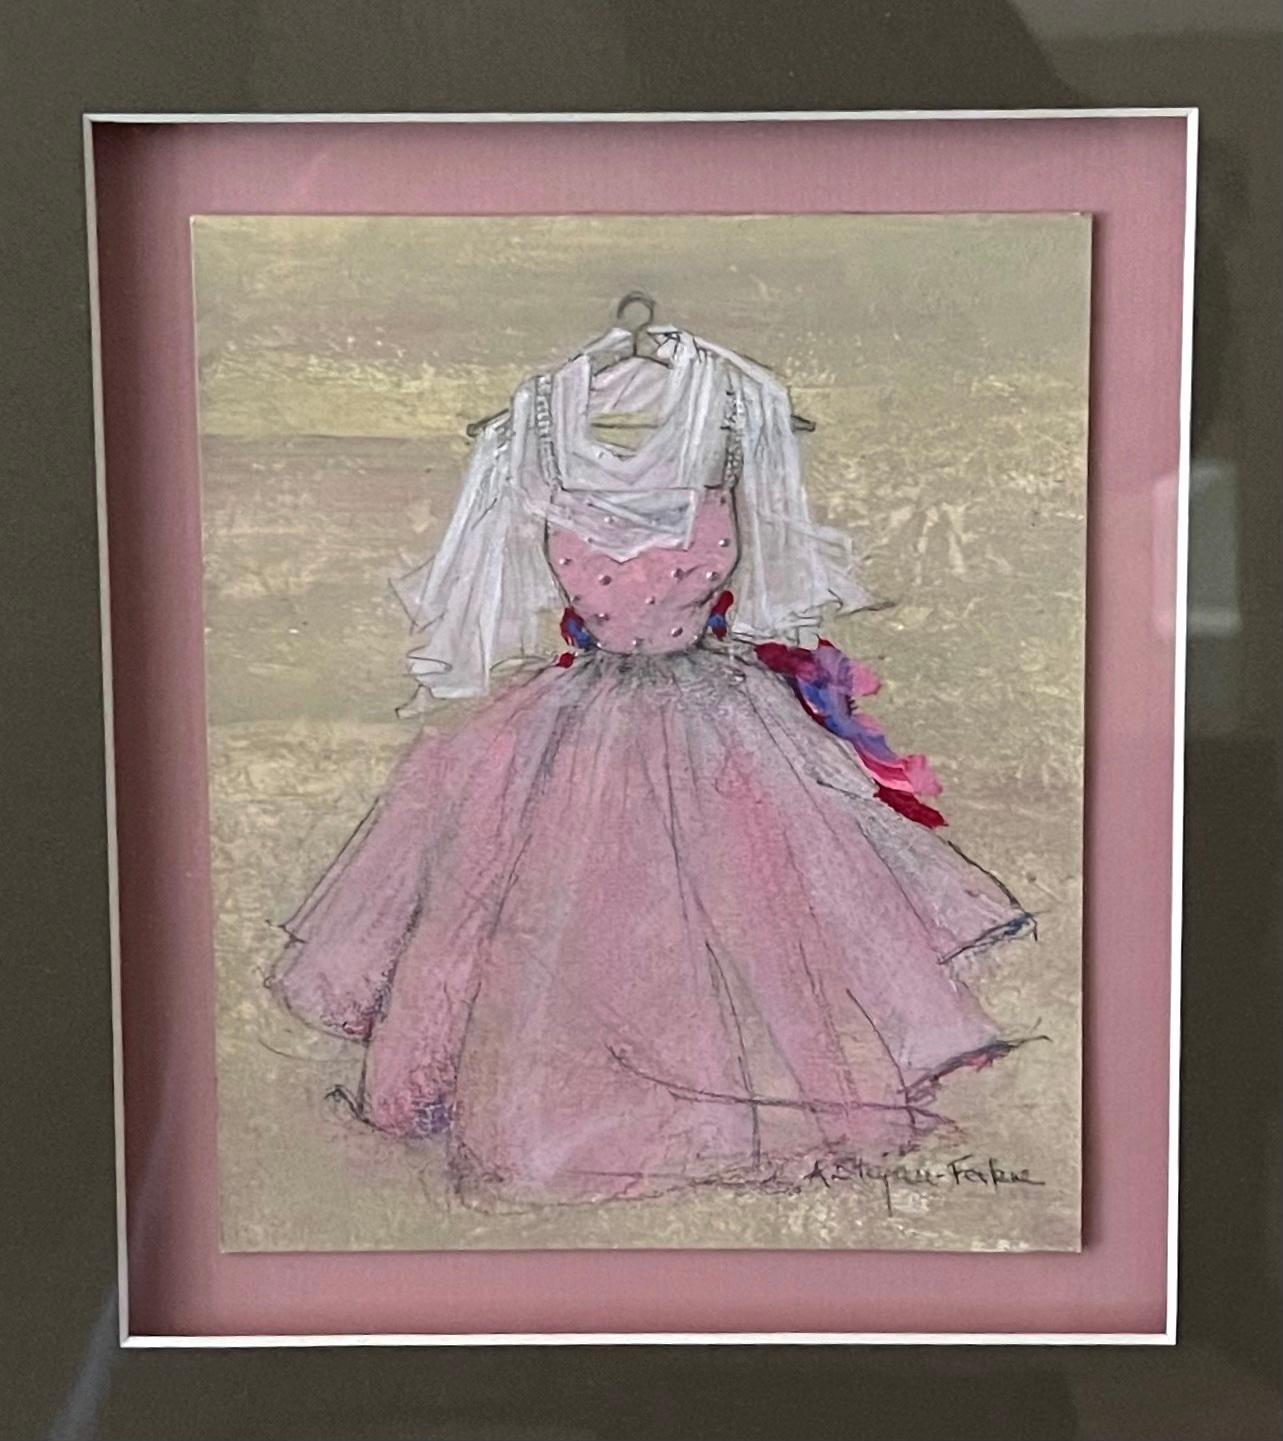 An air of femininity is expressed in this chiffon style dress painting on art board, a nostalgic nod to the graduation, prom or evening dress. Delicate detail builds up a soft texture over translucent layers of pastel pink. The combination of